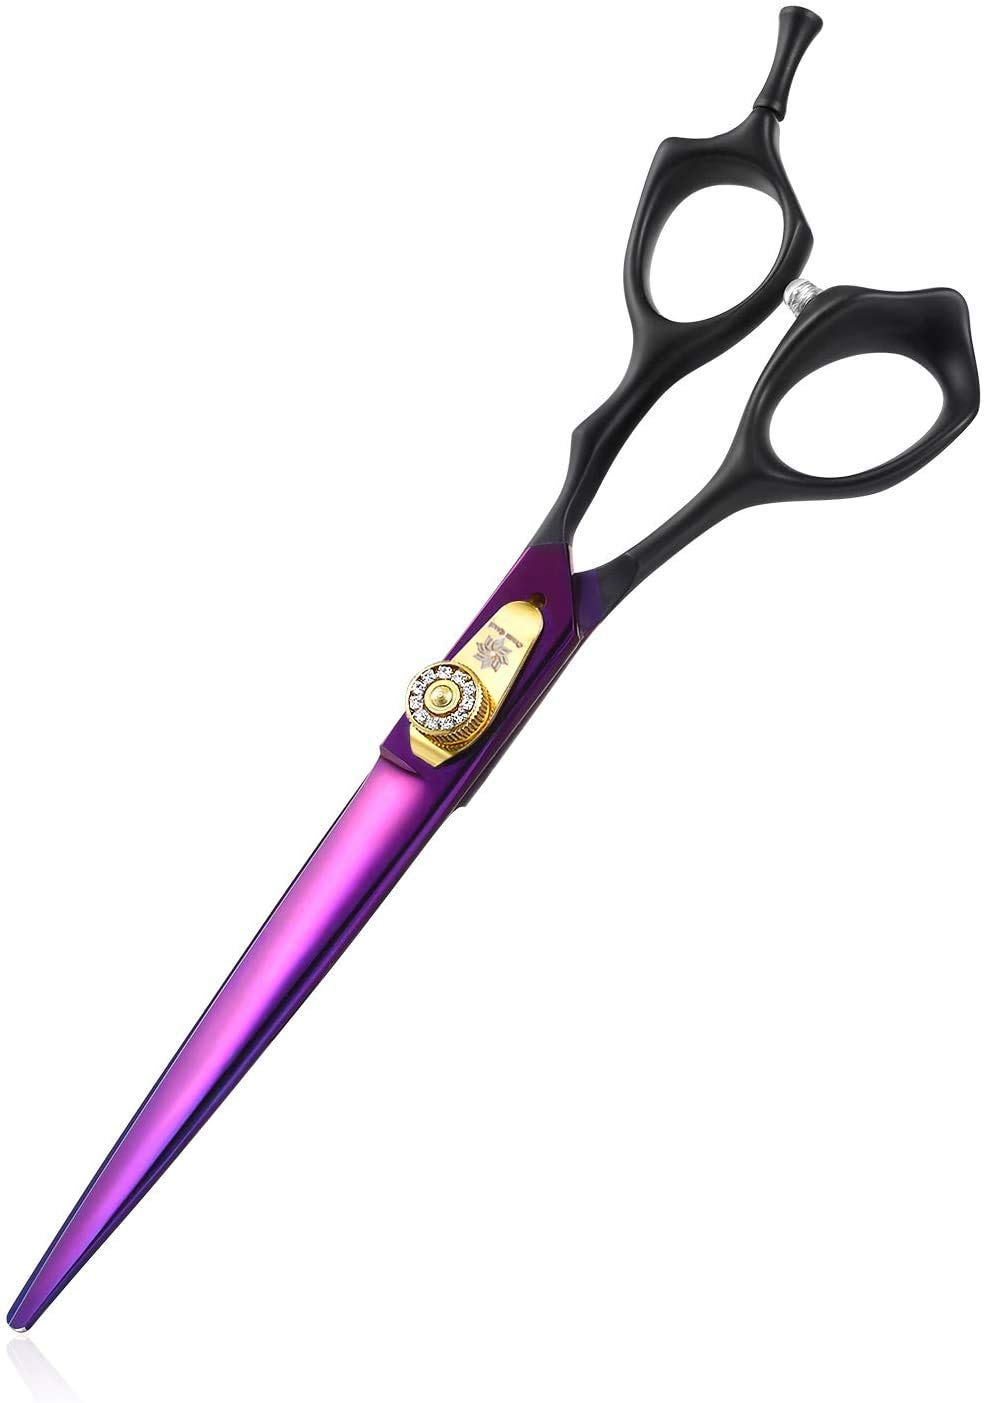 Dream Reach 7.0 inches Professional Decompressed Elastic Handle Pet Grooming Scissors Set,Straight & Chunker & 2 Curved Scissors 4pcs Set for Dog Grooming (Purple) (Cutting Scissor) - image 1 of 3